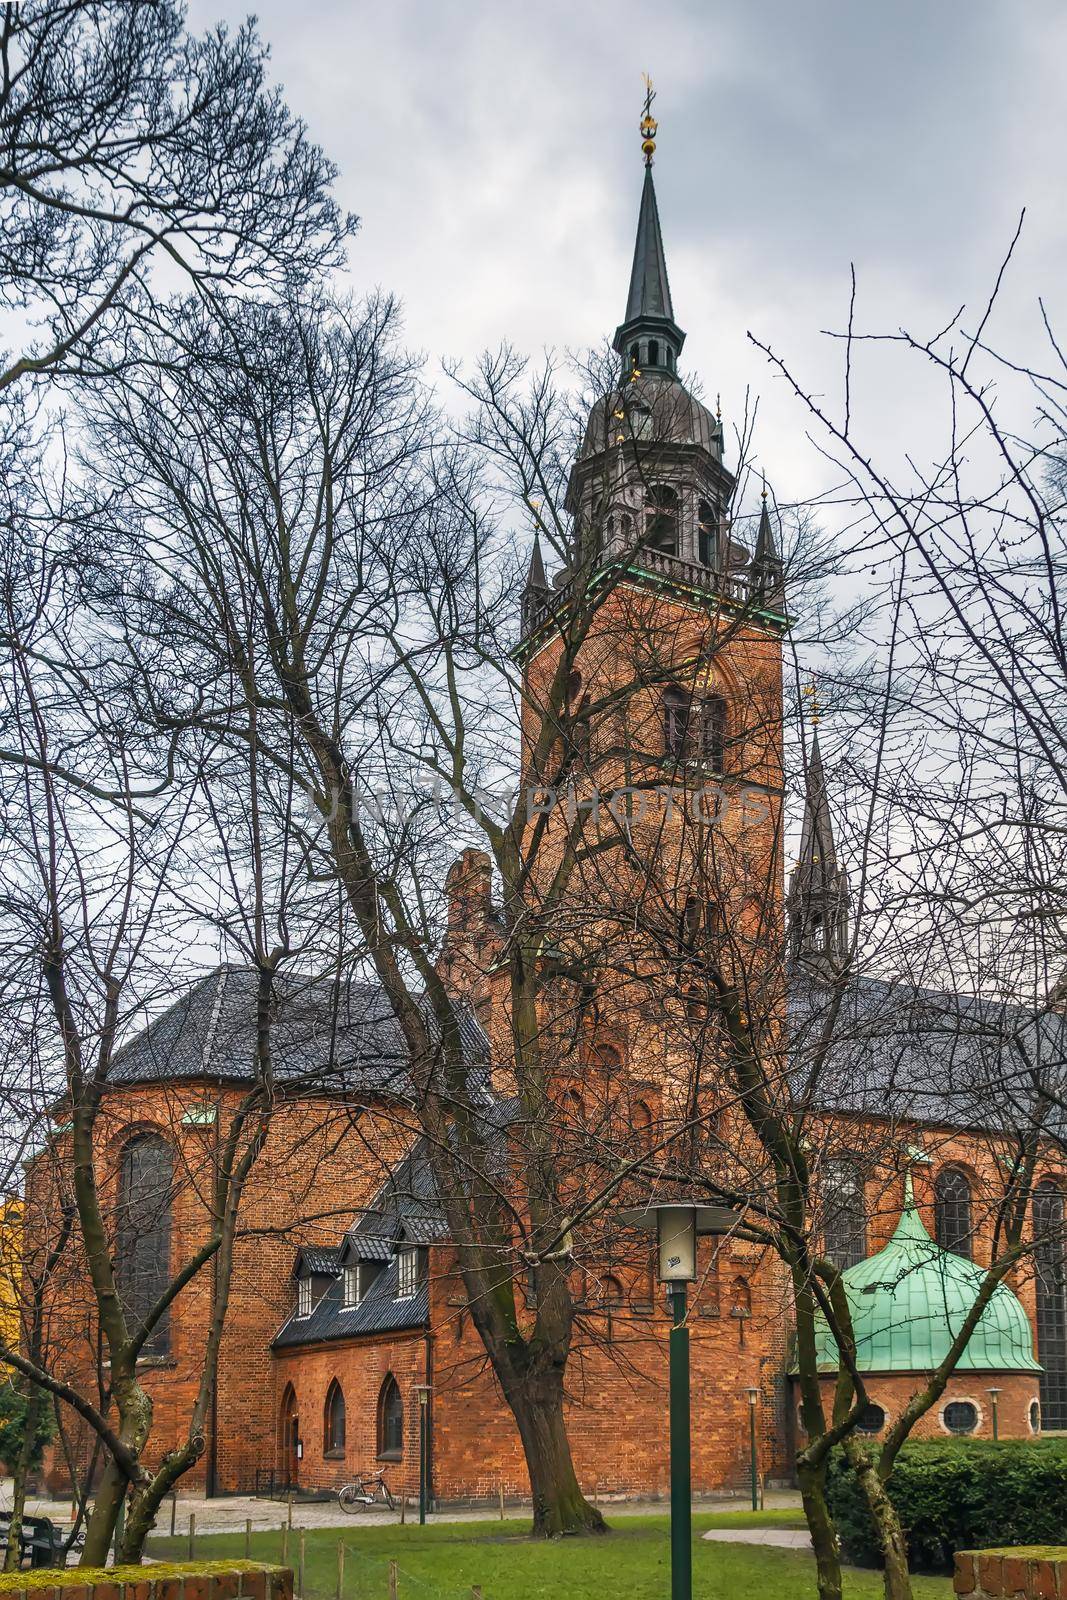 Church of the Holy Ghost is one of the city's oldest churches in Copenhagen, Denmark.